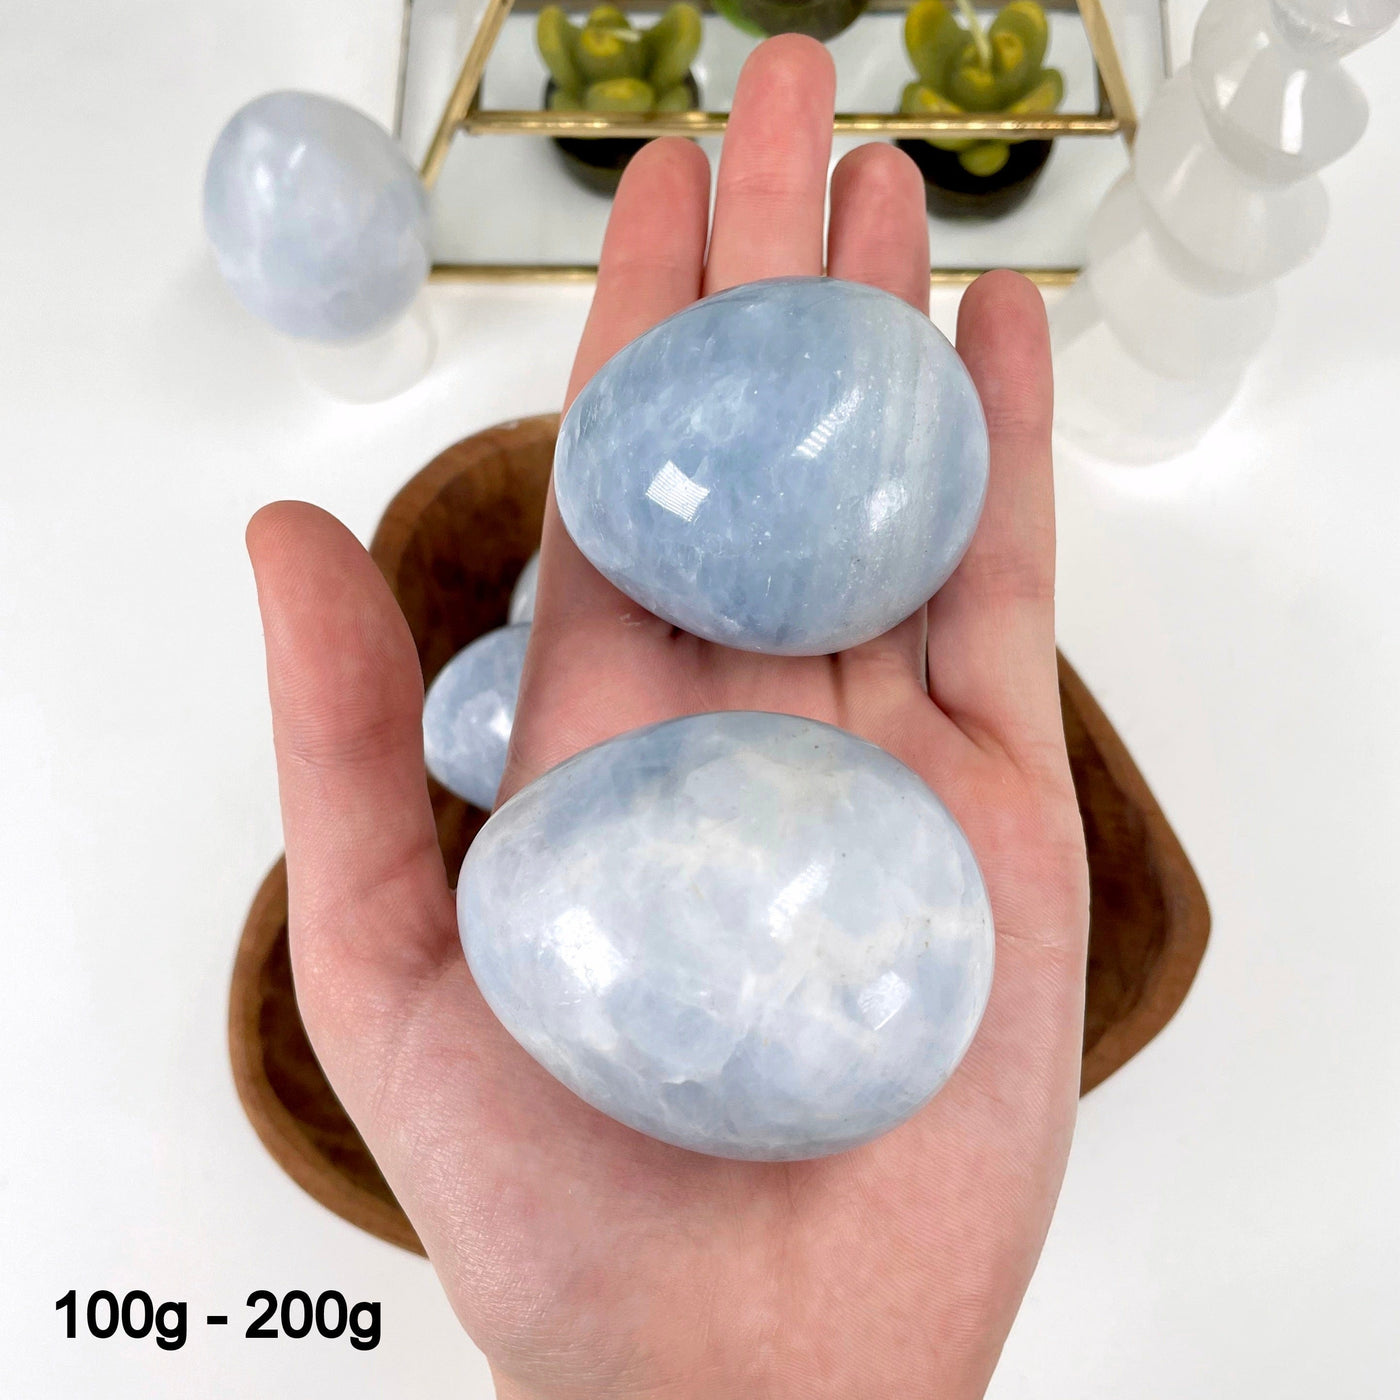 two 100g - 200g blue calcite polished eggs in hand for size reference and possible variations